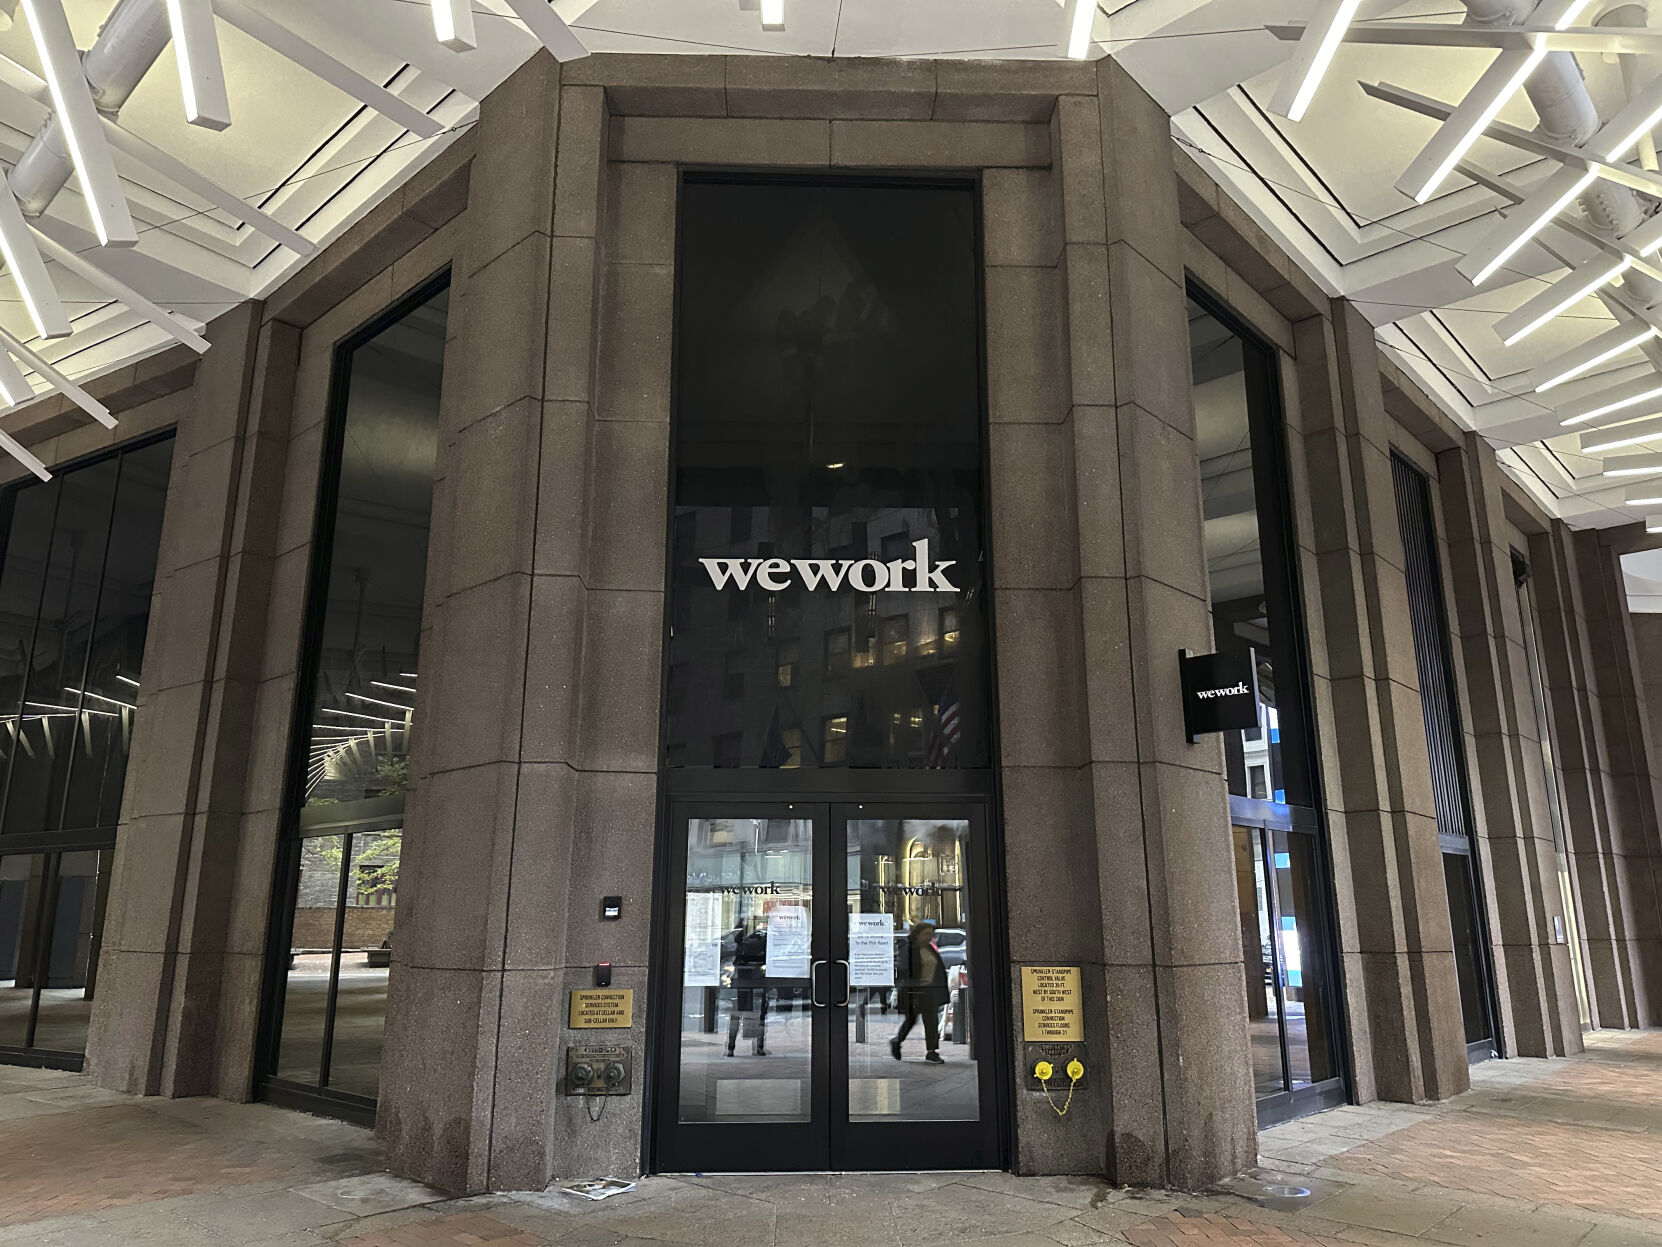 <p>The WeWork logo appears on a building exterior in New York on Tuesday, Nov. 7, 2023. WeWork has filed for Chapter 11 bankruptcy protection, marking a stunning fall for the office sharing company once seen as a Wall Street darling that promised to upend the way people went to work around the world. (AP Photo/Peter Morgan)</p>   PHOTO CREDIT: Peter Morgan - staff, ASSOCIATED PRESS